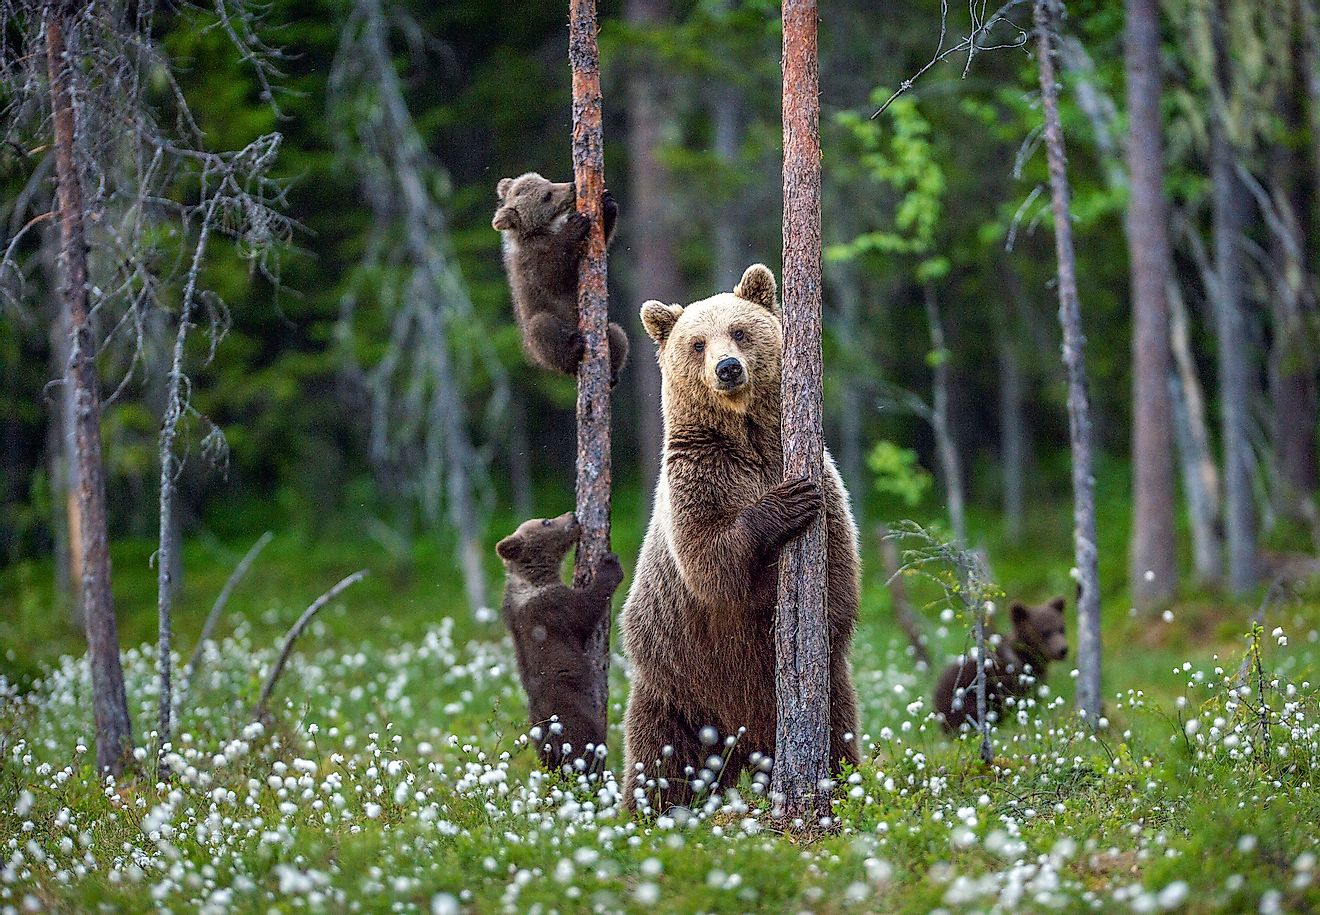 Brown bear with cubs in the taiga forests of Europe. Image credit: Sergey Uryadnikov/Shutterstock.com